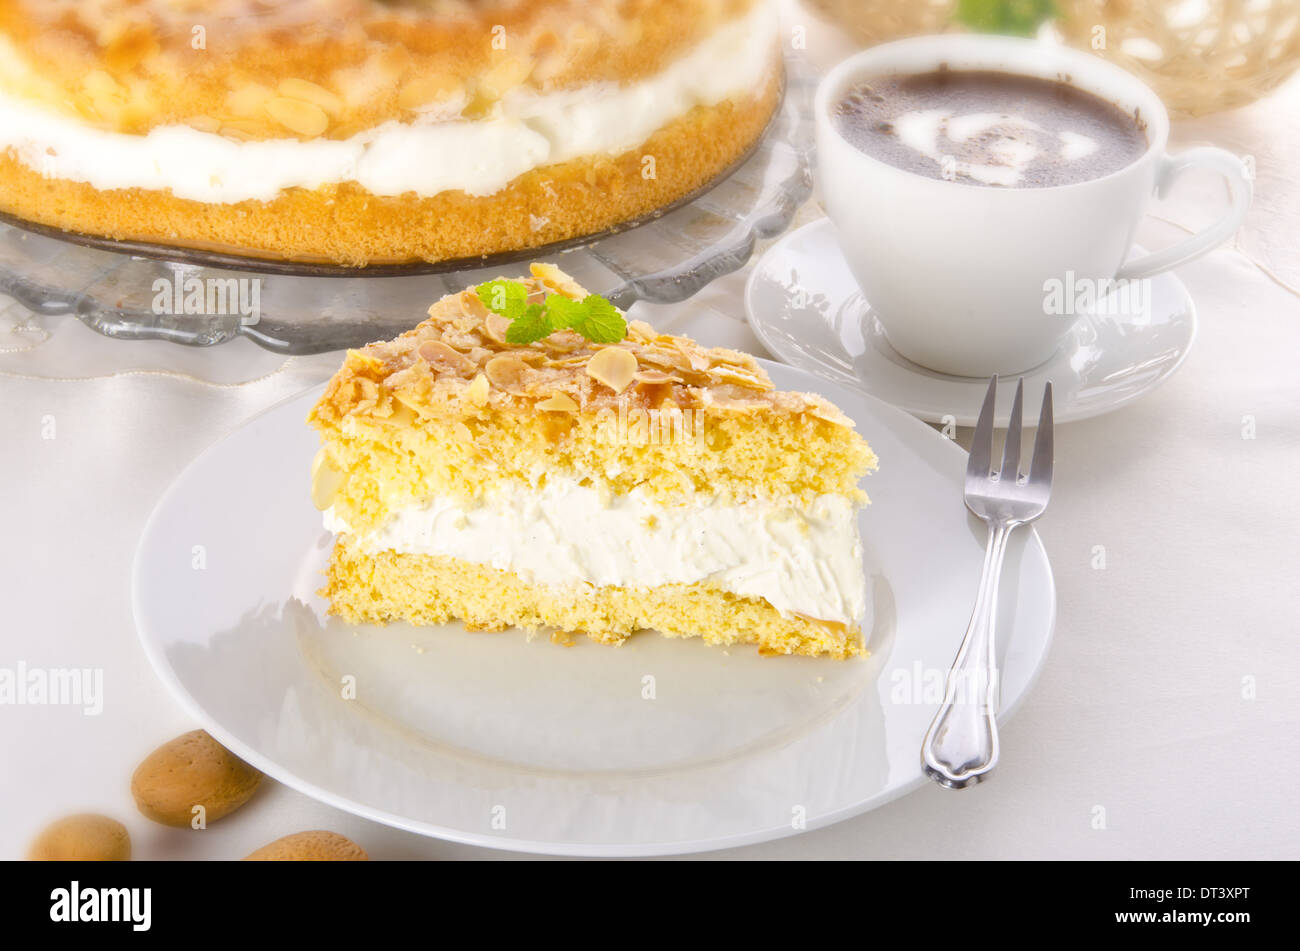 flat cake with an almond and sugar coating Stock Photo